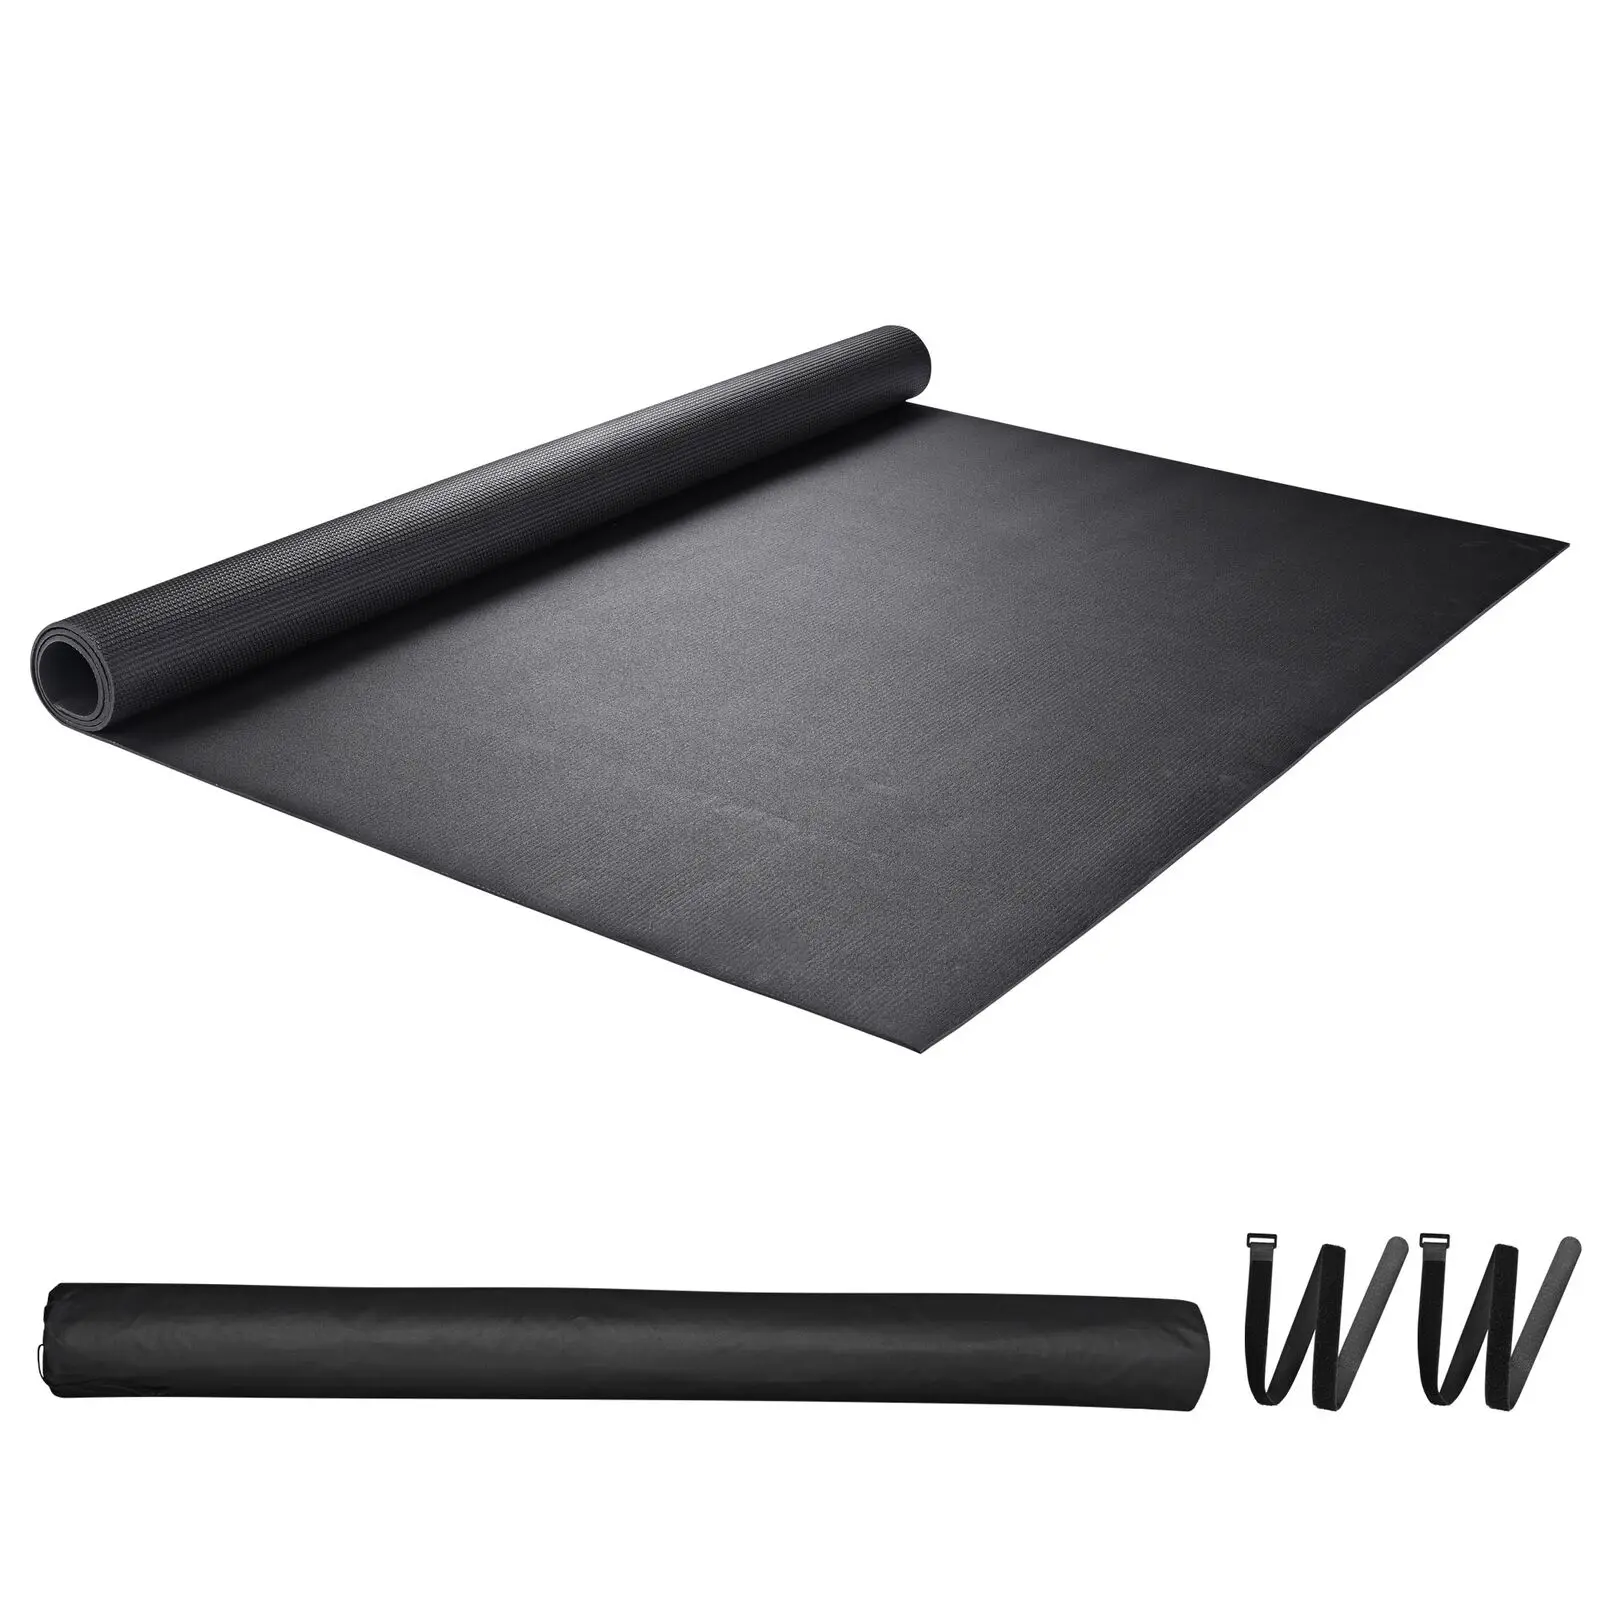 

High-intensity PVC material Extra Large Exercise Mat 182.88 x 243.8 x 0.6 cm